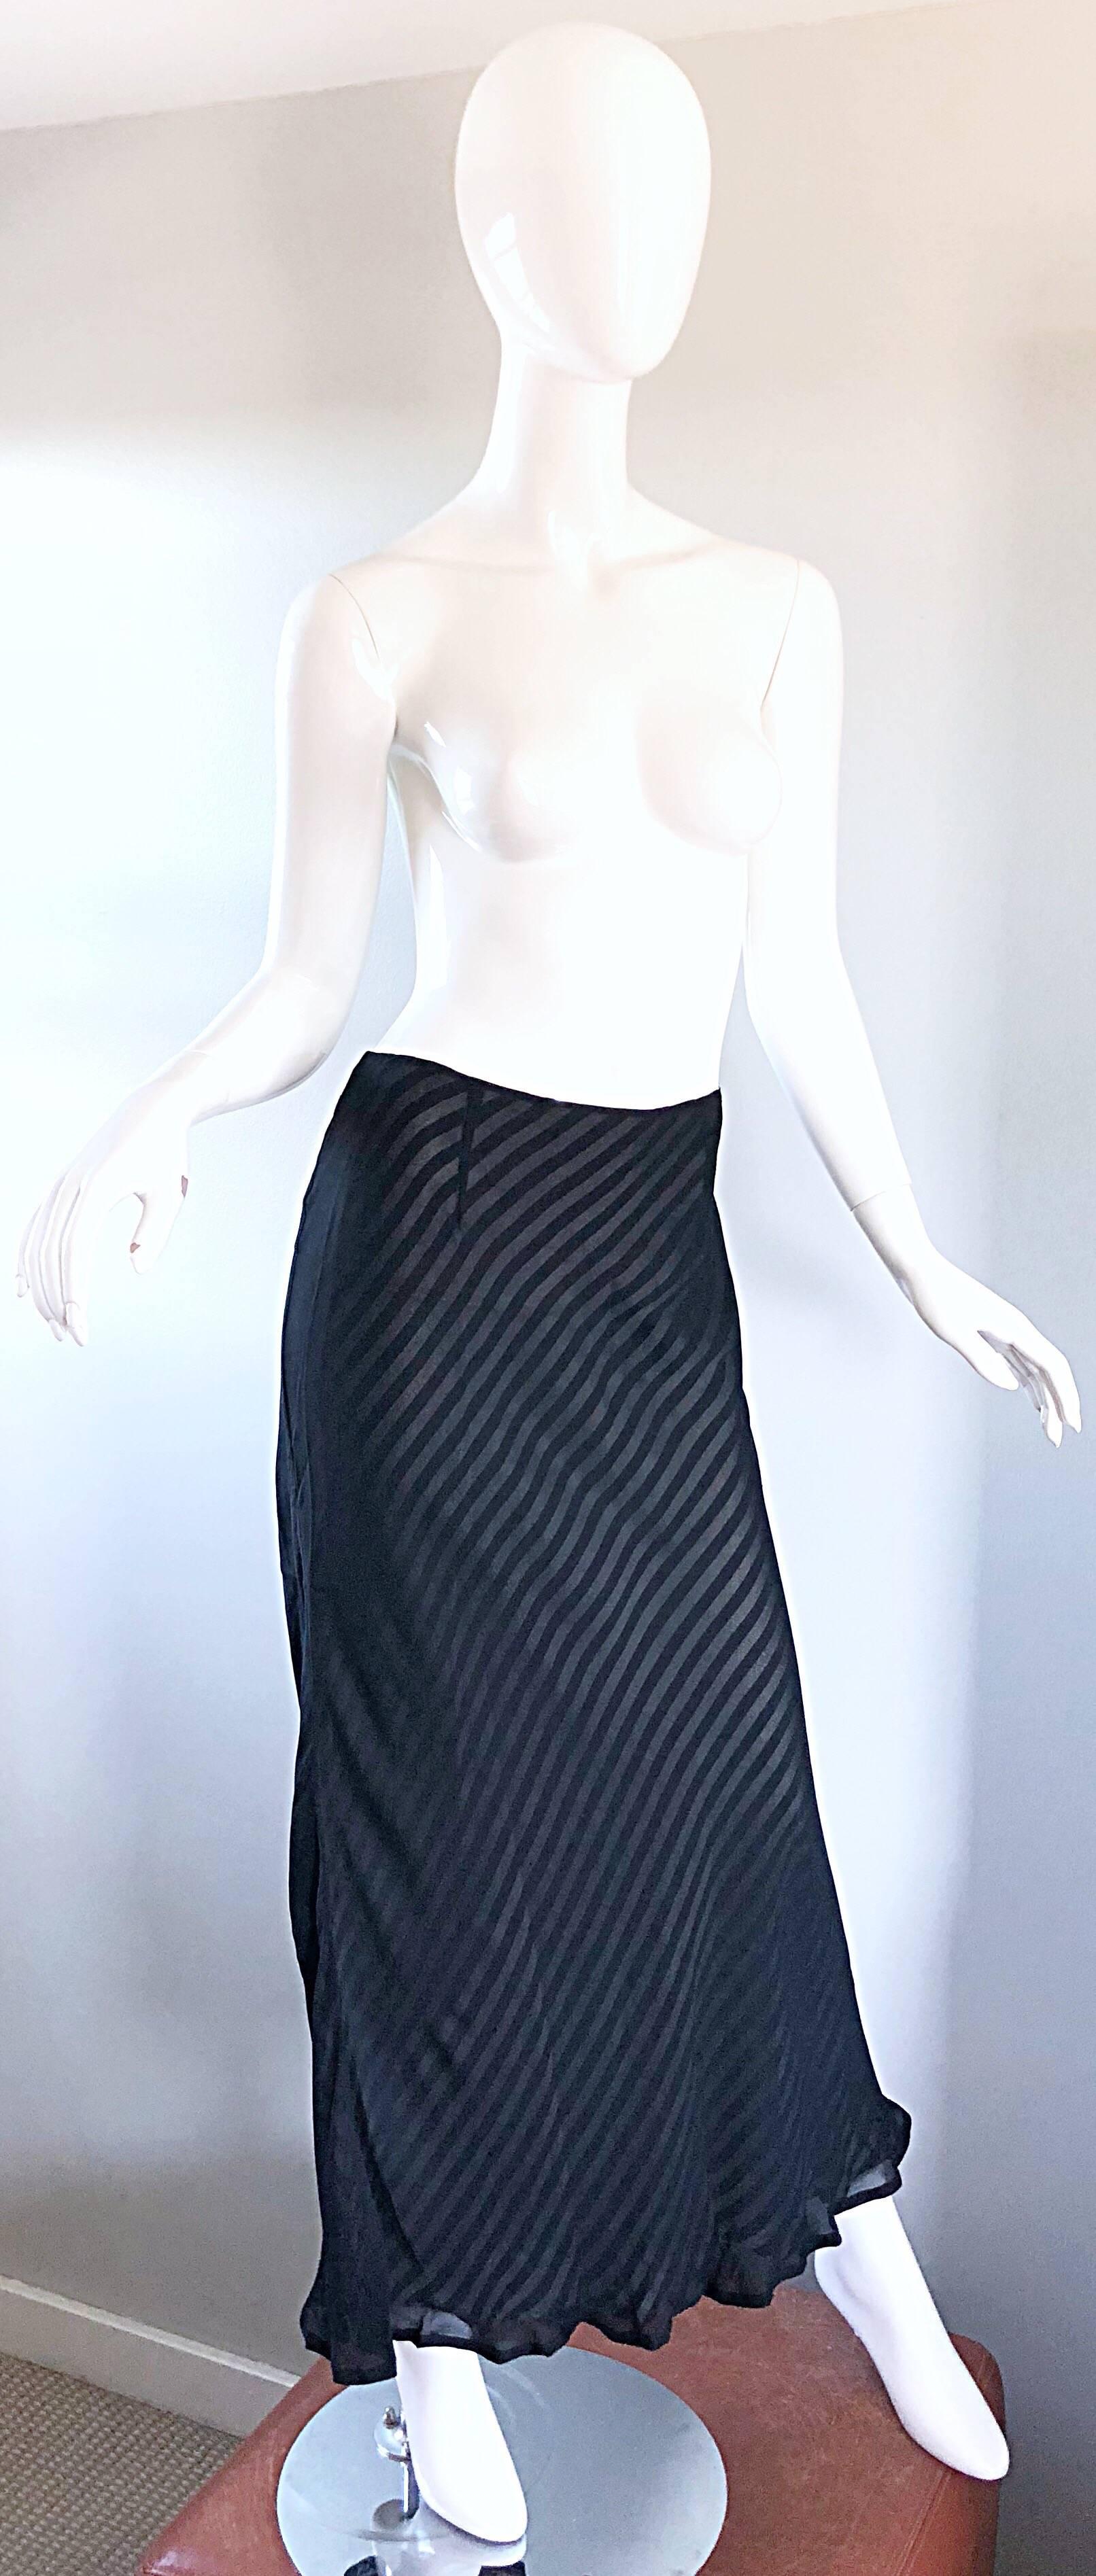 Moschino Cheap & Chic 1990s Size 12 Black and White Striped Vintage Maxi Skirt For Sale 2